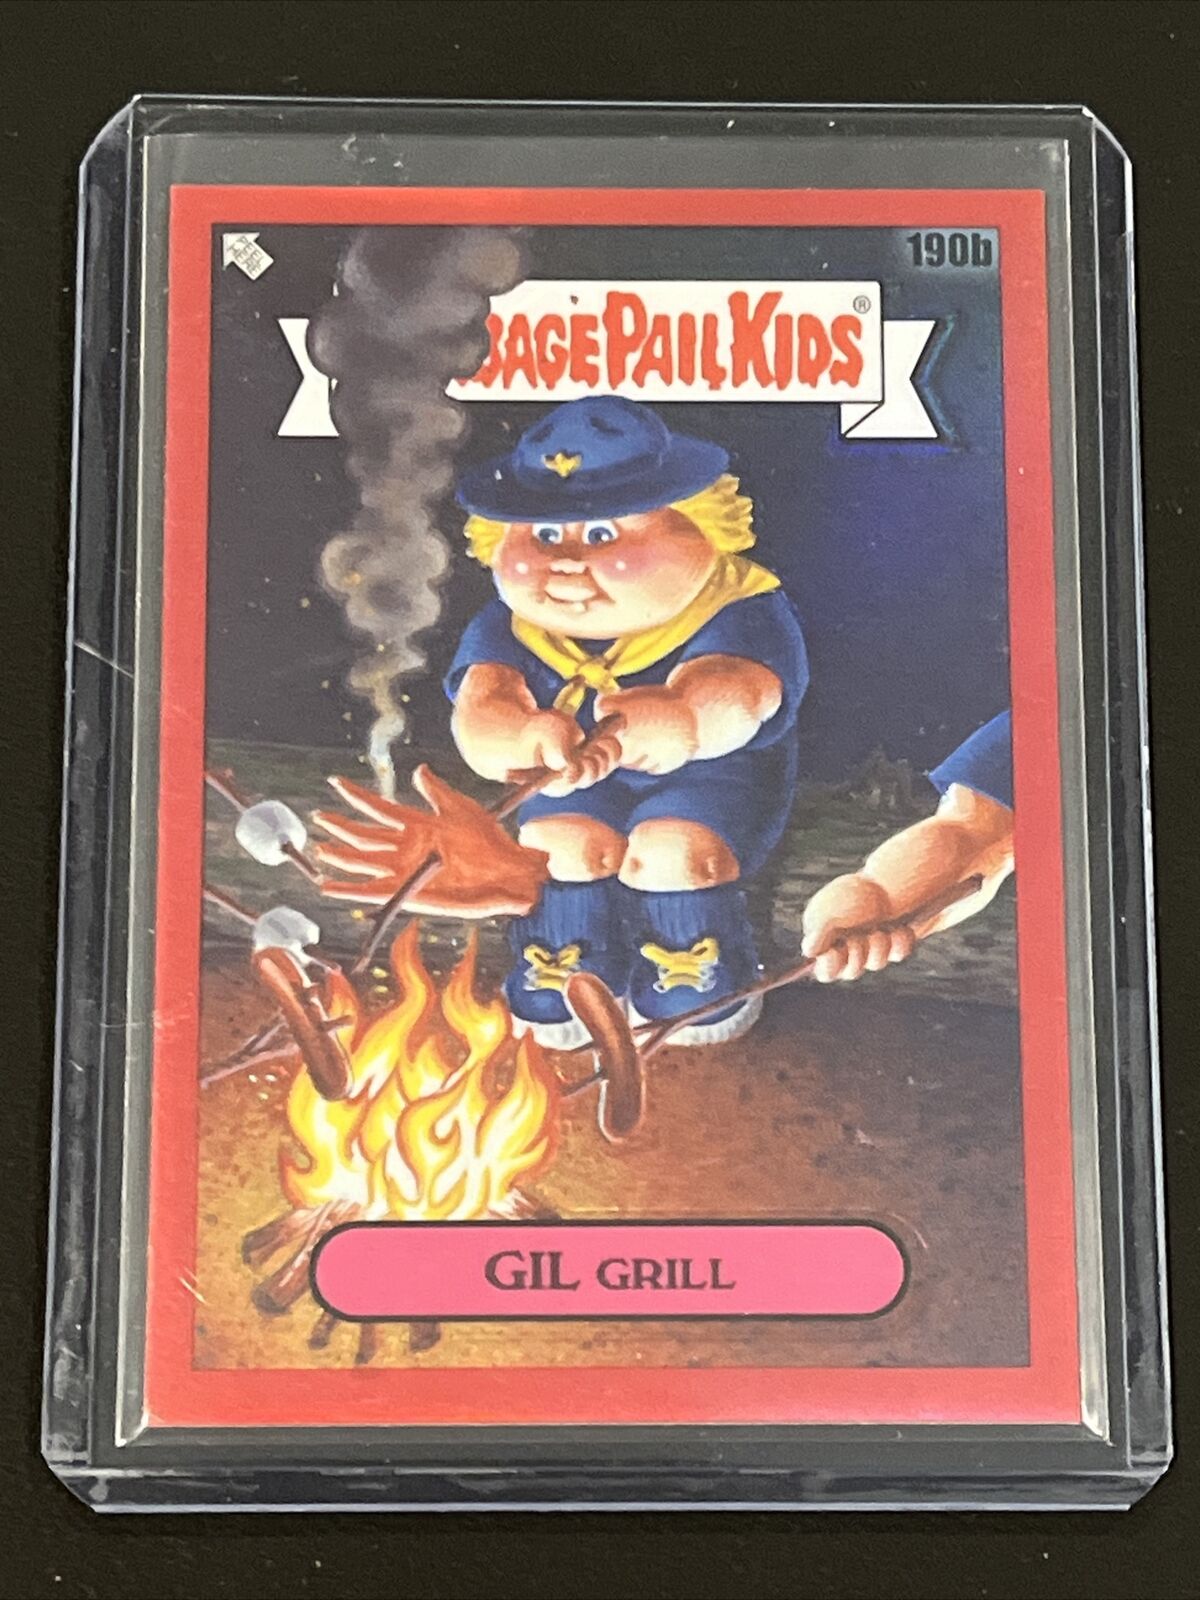 2021 Topps Chrome Garbage Pail Kids Series 5 Gil Grill 190b Red Refractor 5/5 